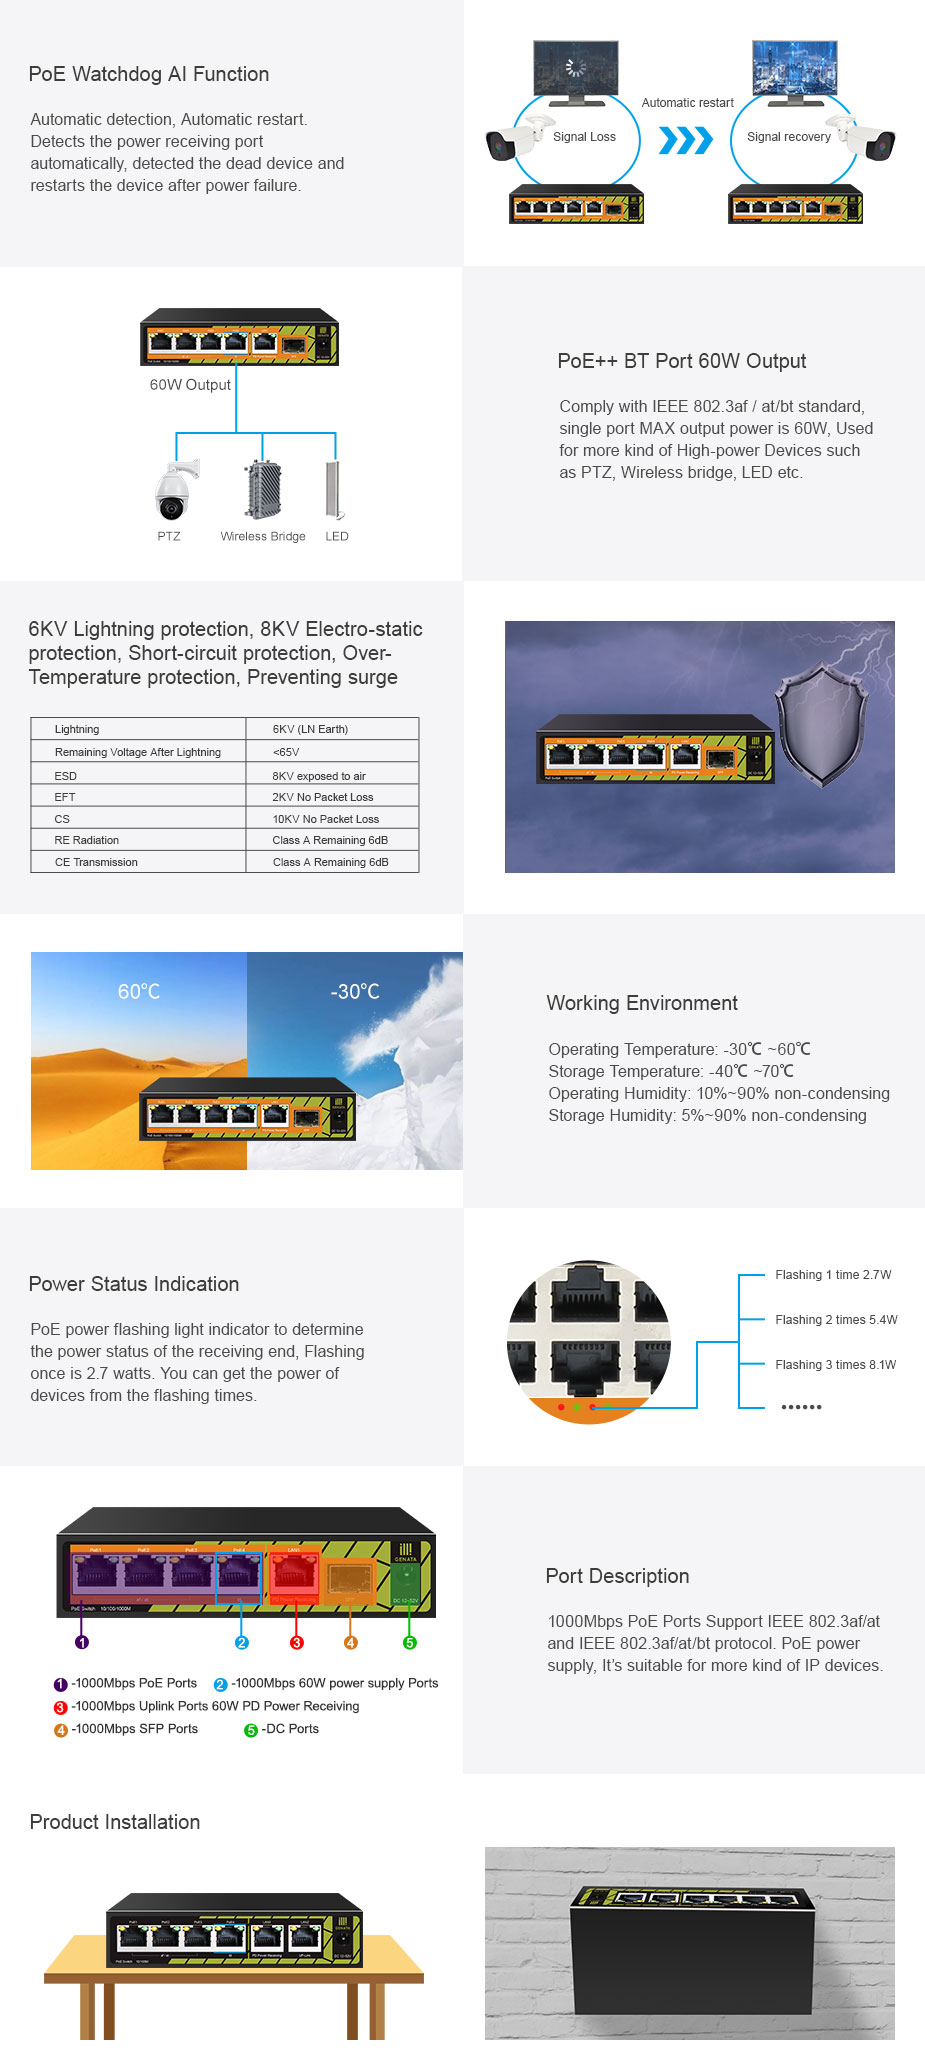 POE extend switch 1000Mbps